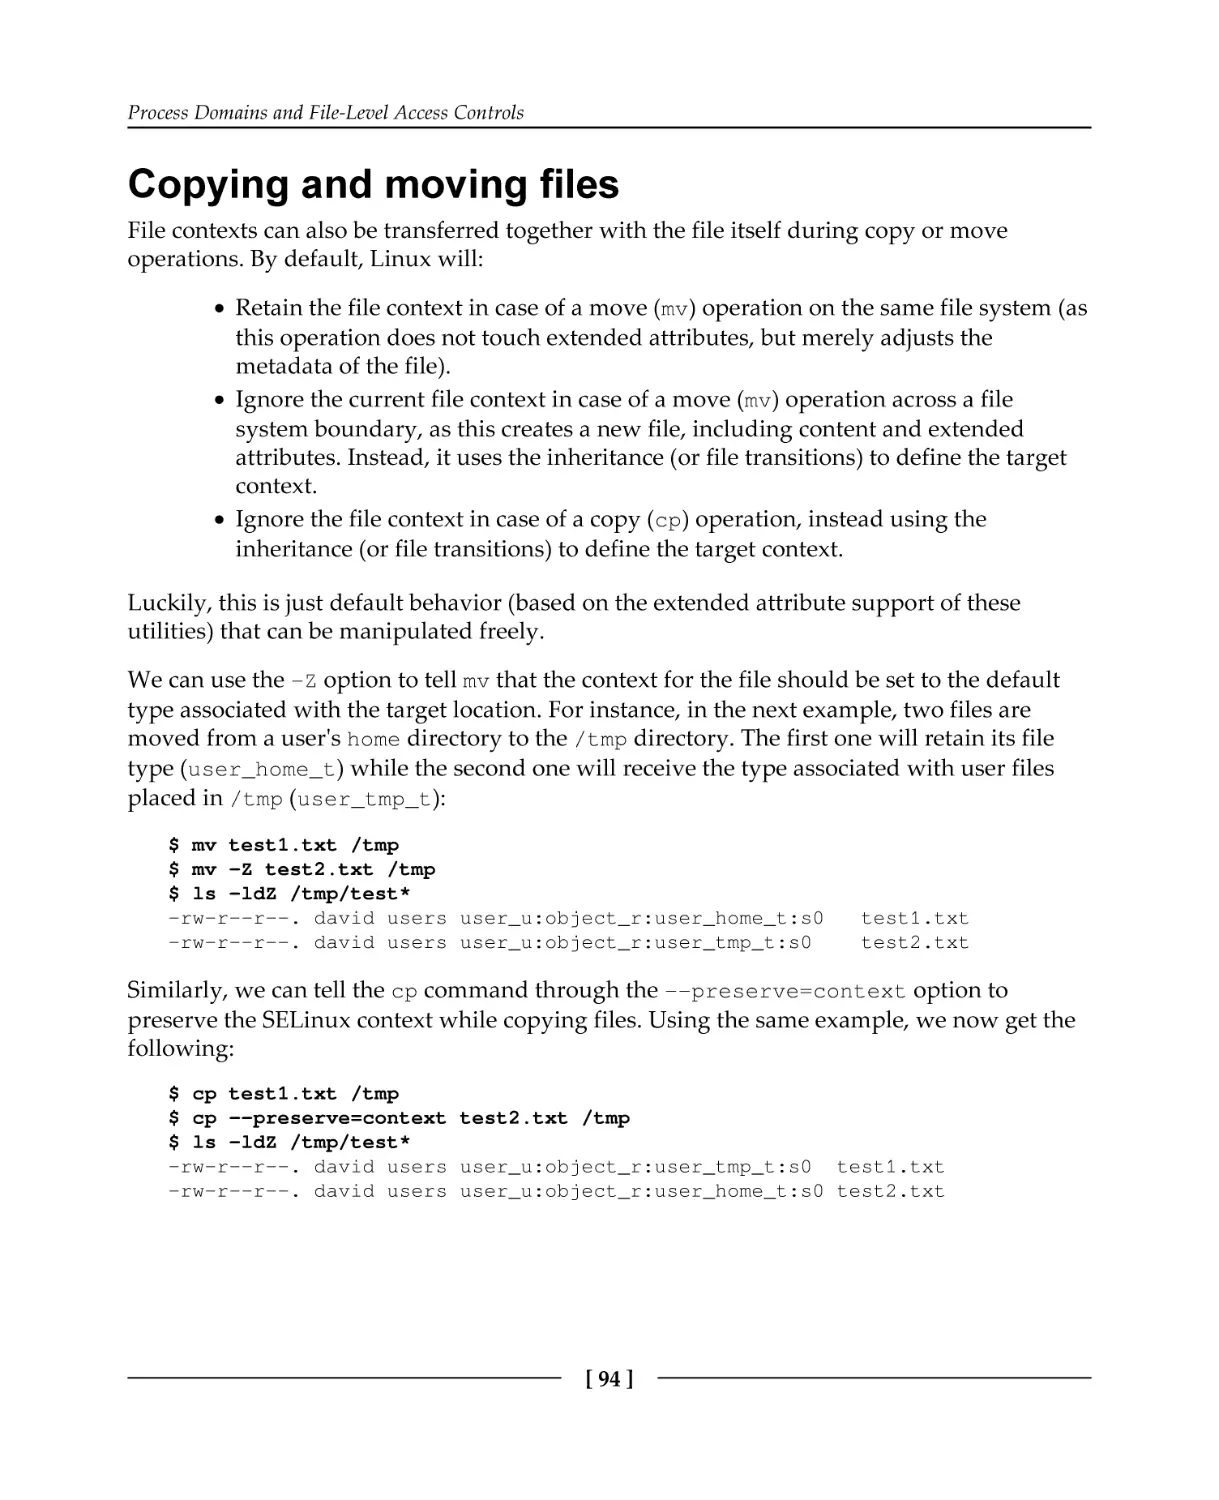 Copying and moving files